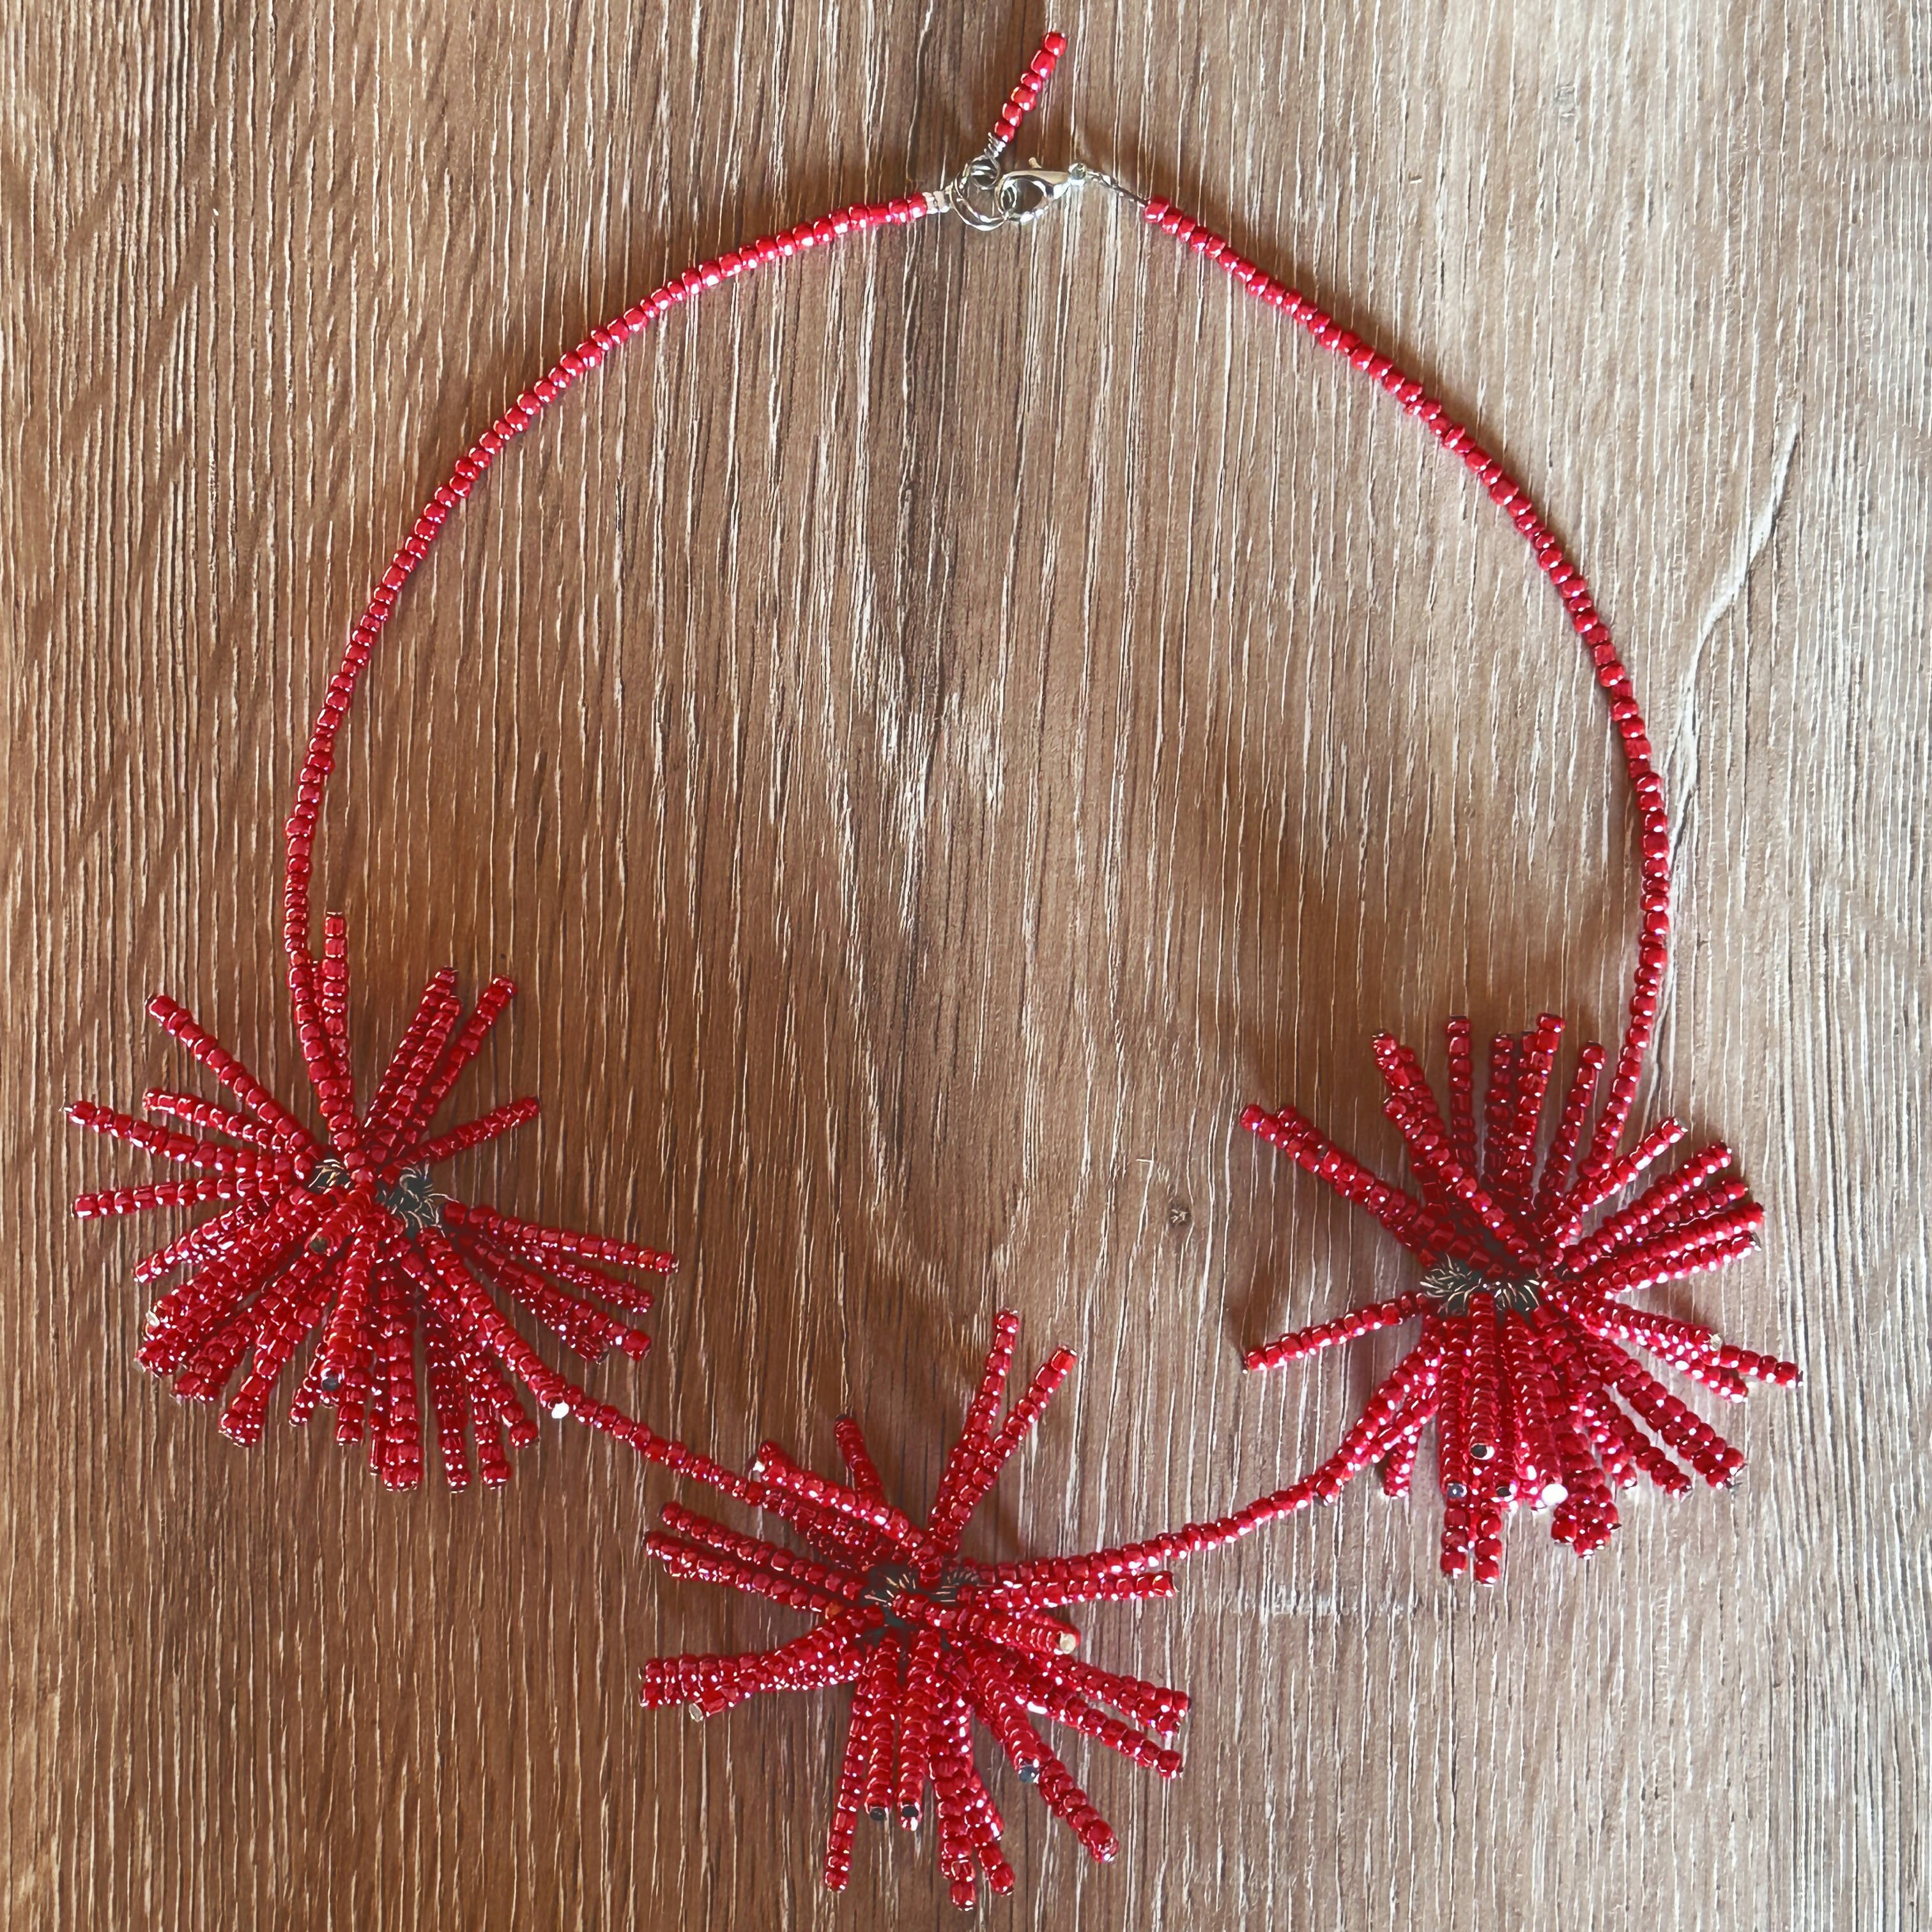 The BLOOMING collection: Red Hot!